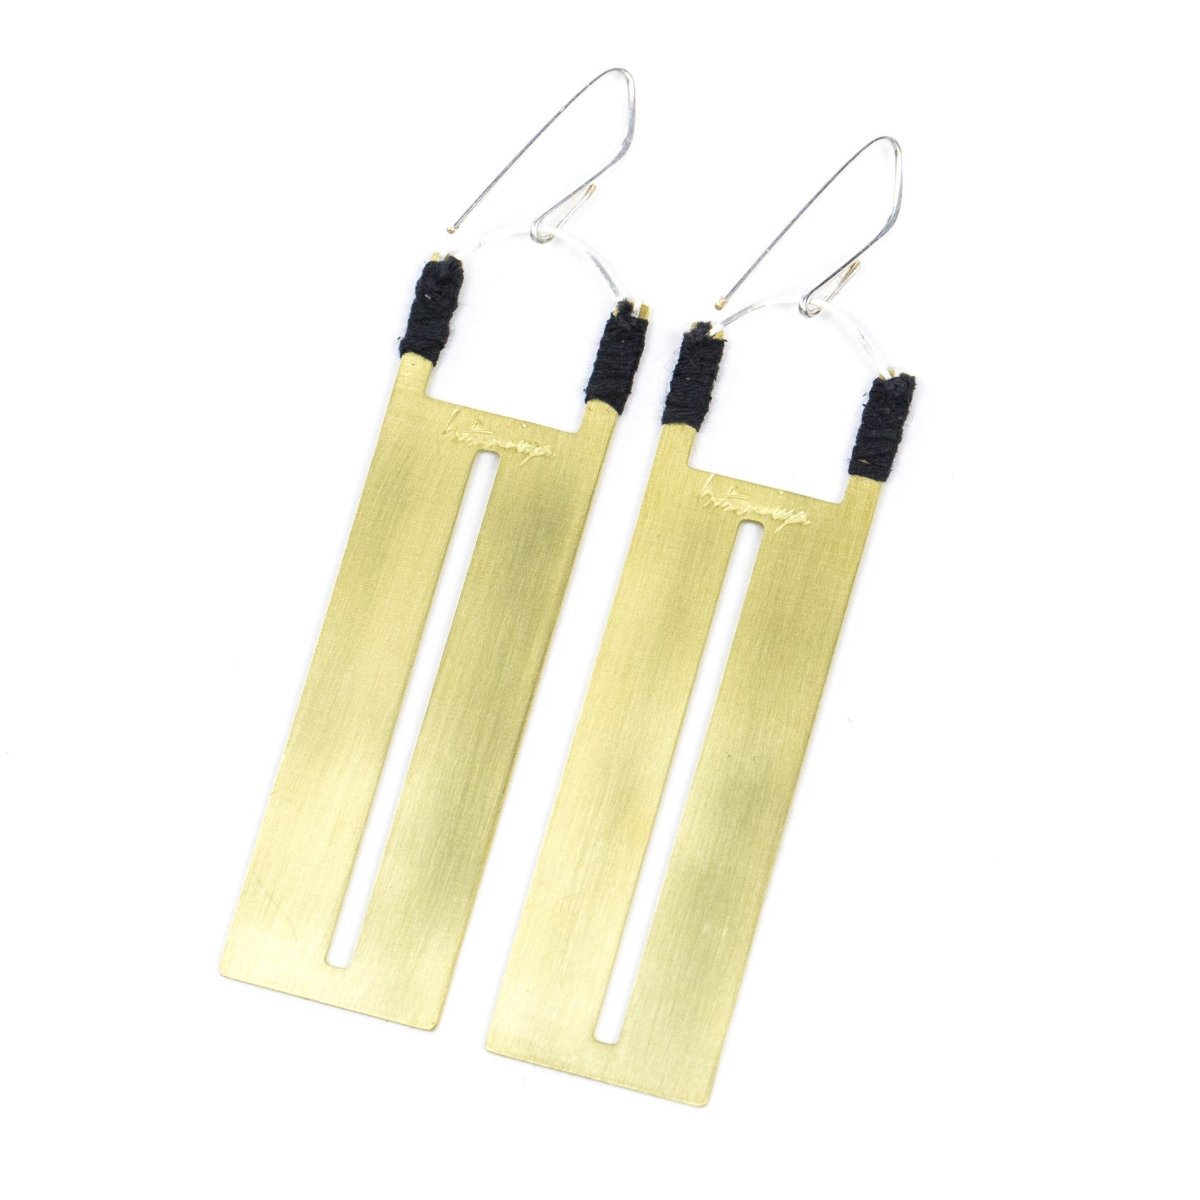 Rectangular brass pendants with thin slit cutouts down the center, accented with gray Japanese cotton thread and sterling silver earring wires, and engraved on the back with the betsy & iya logo. Hand-crafted in Portland, Oregon. 